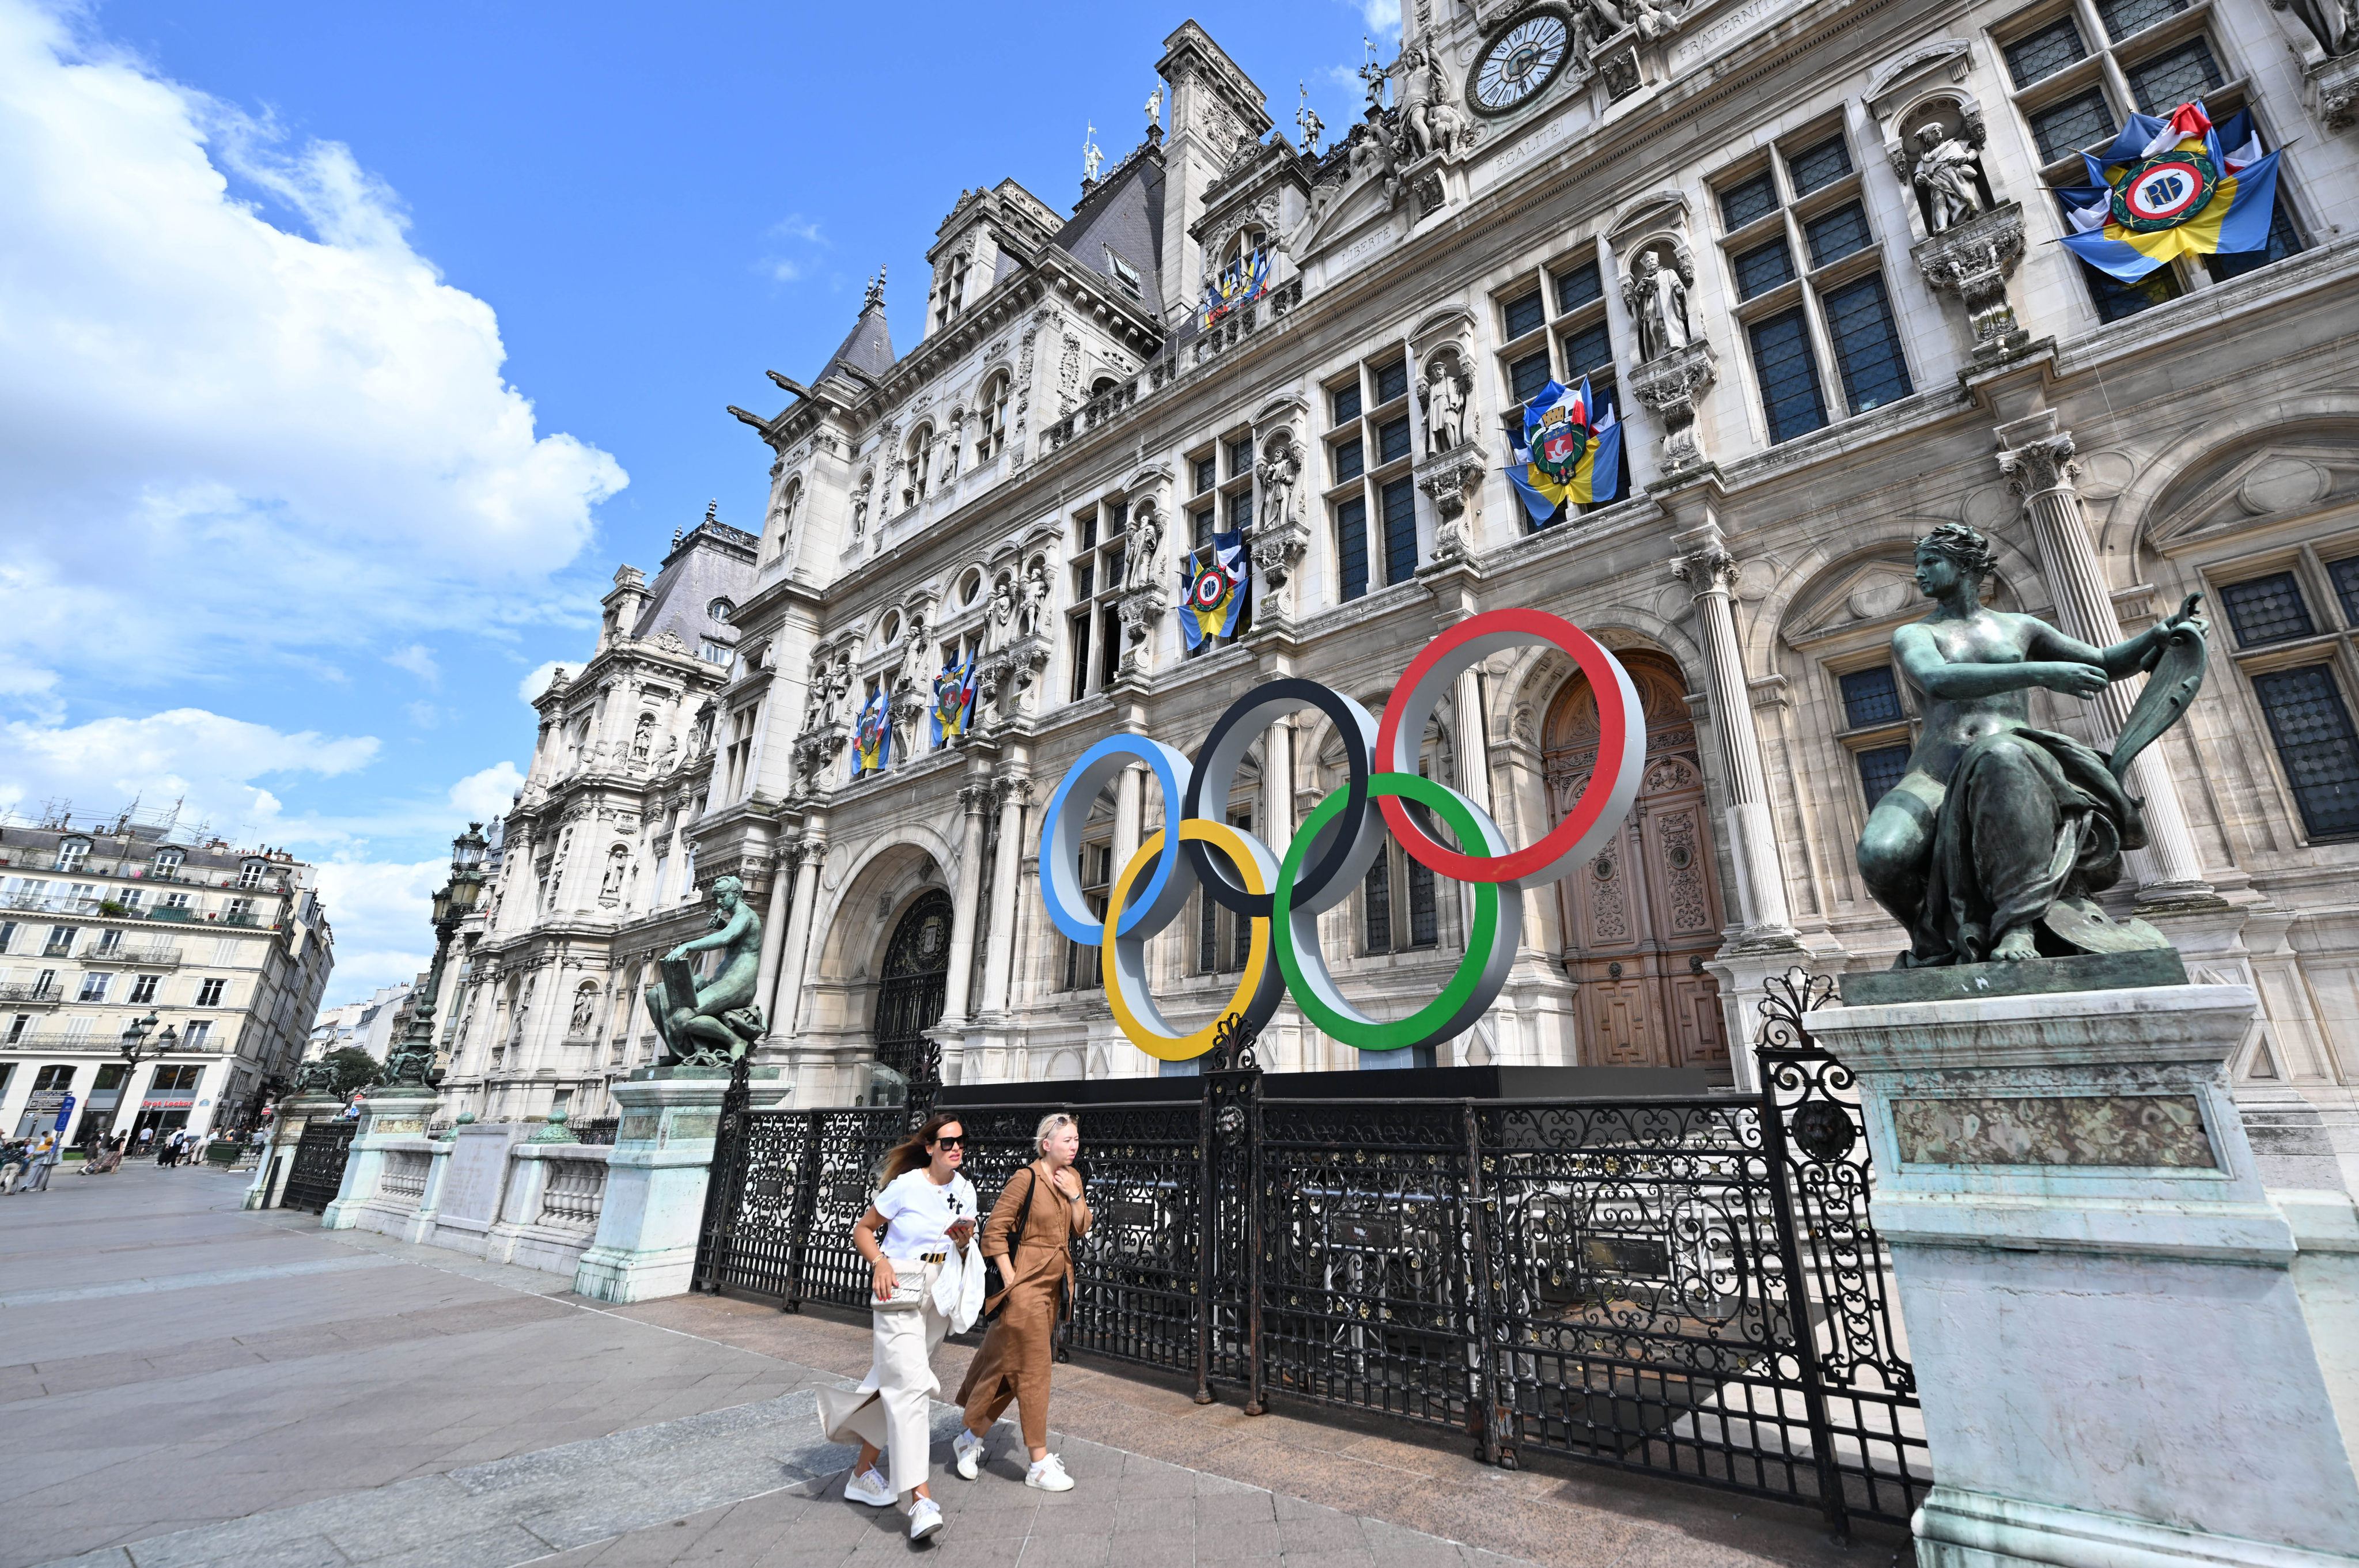 Paris 2024 Olympics: The opening ceremony in 5 questions